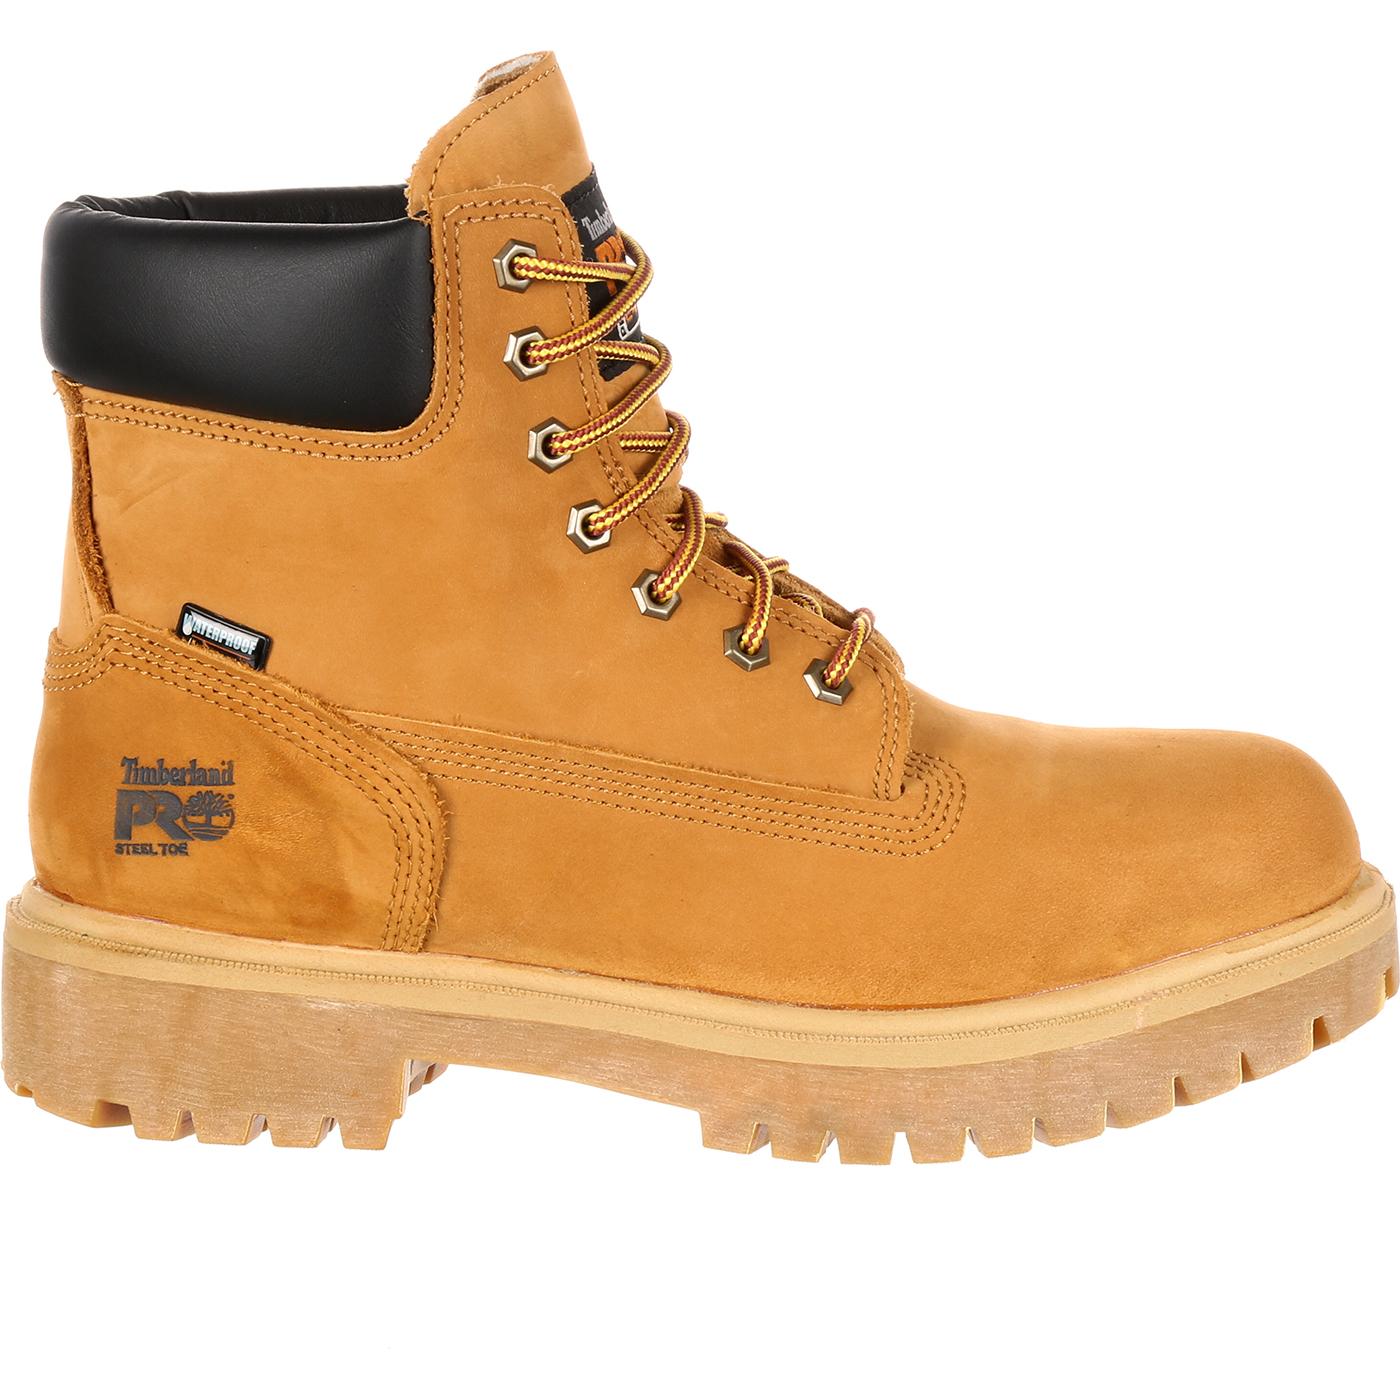 Timberland PRO Direct Attach Steel Toe Waterproof 200g Insulated Work ...